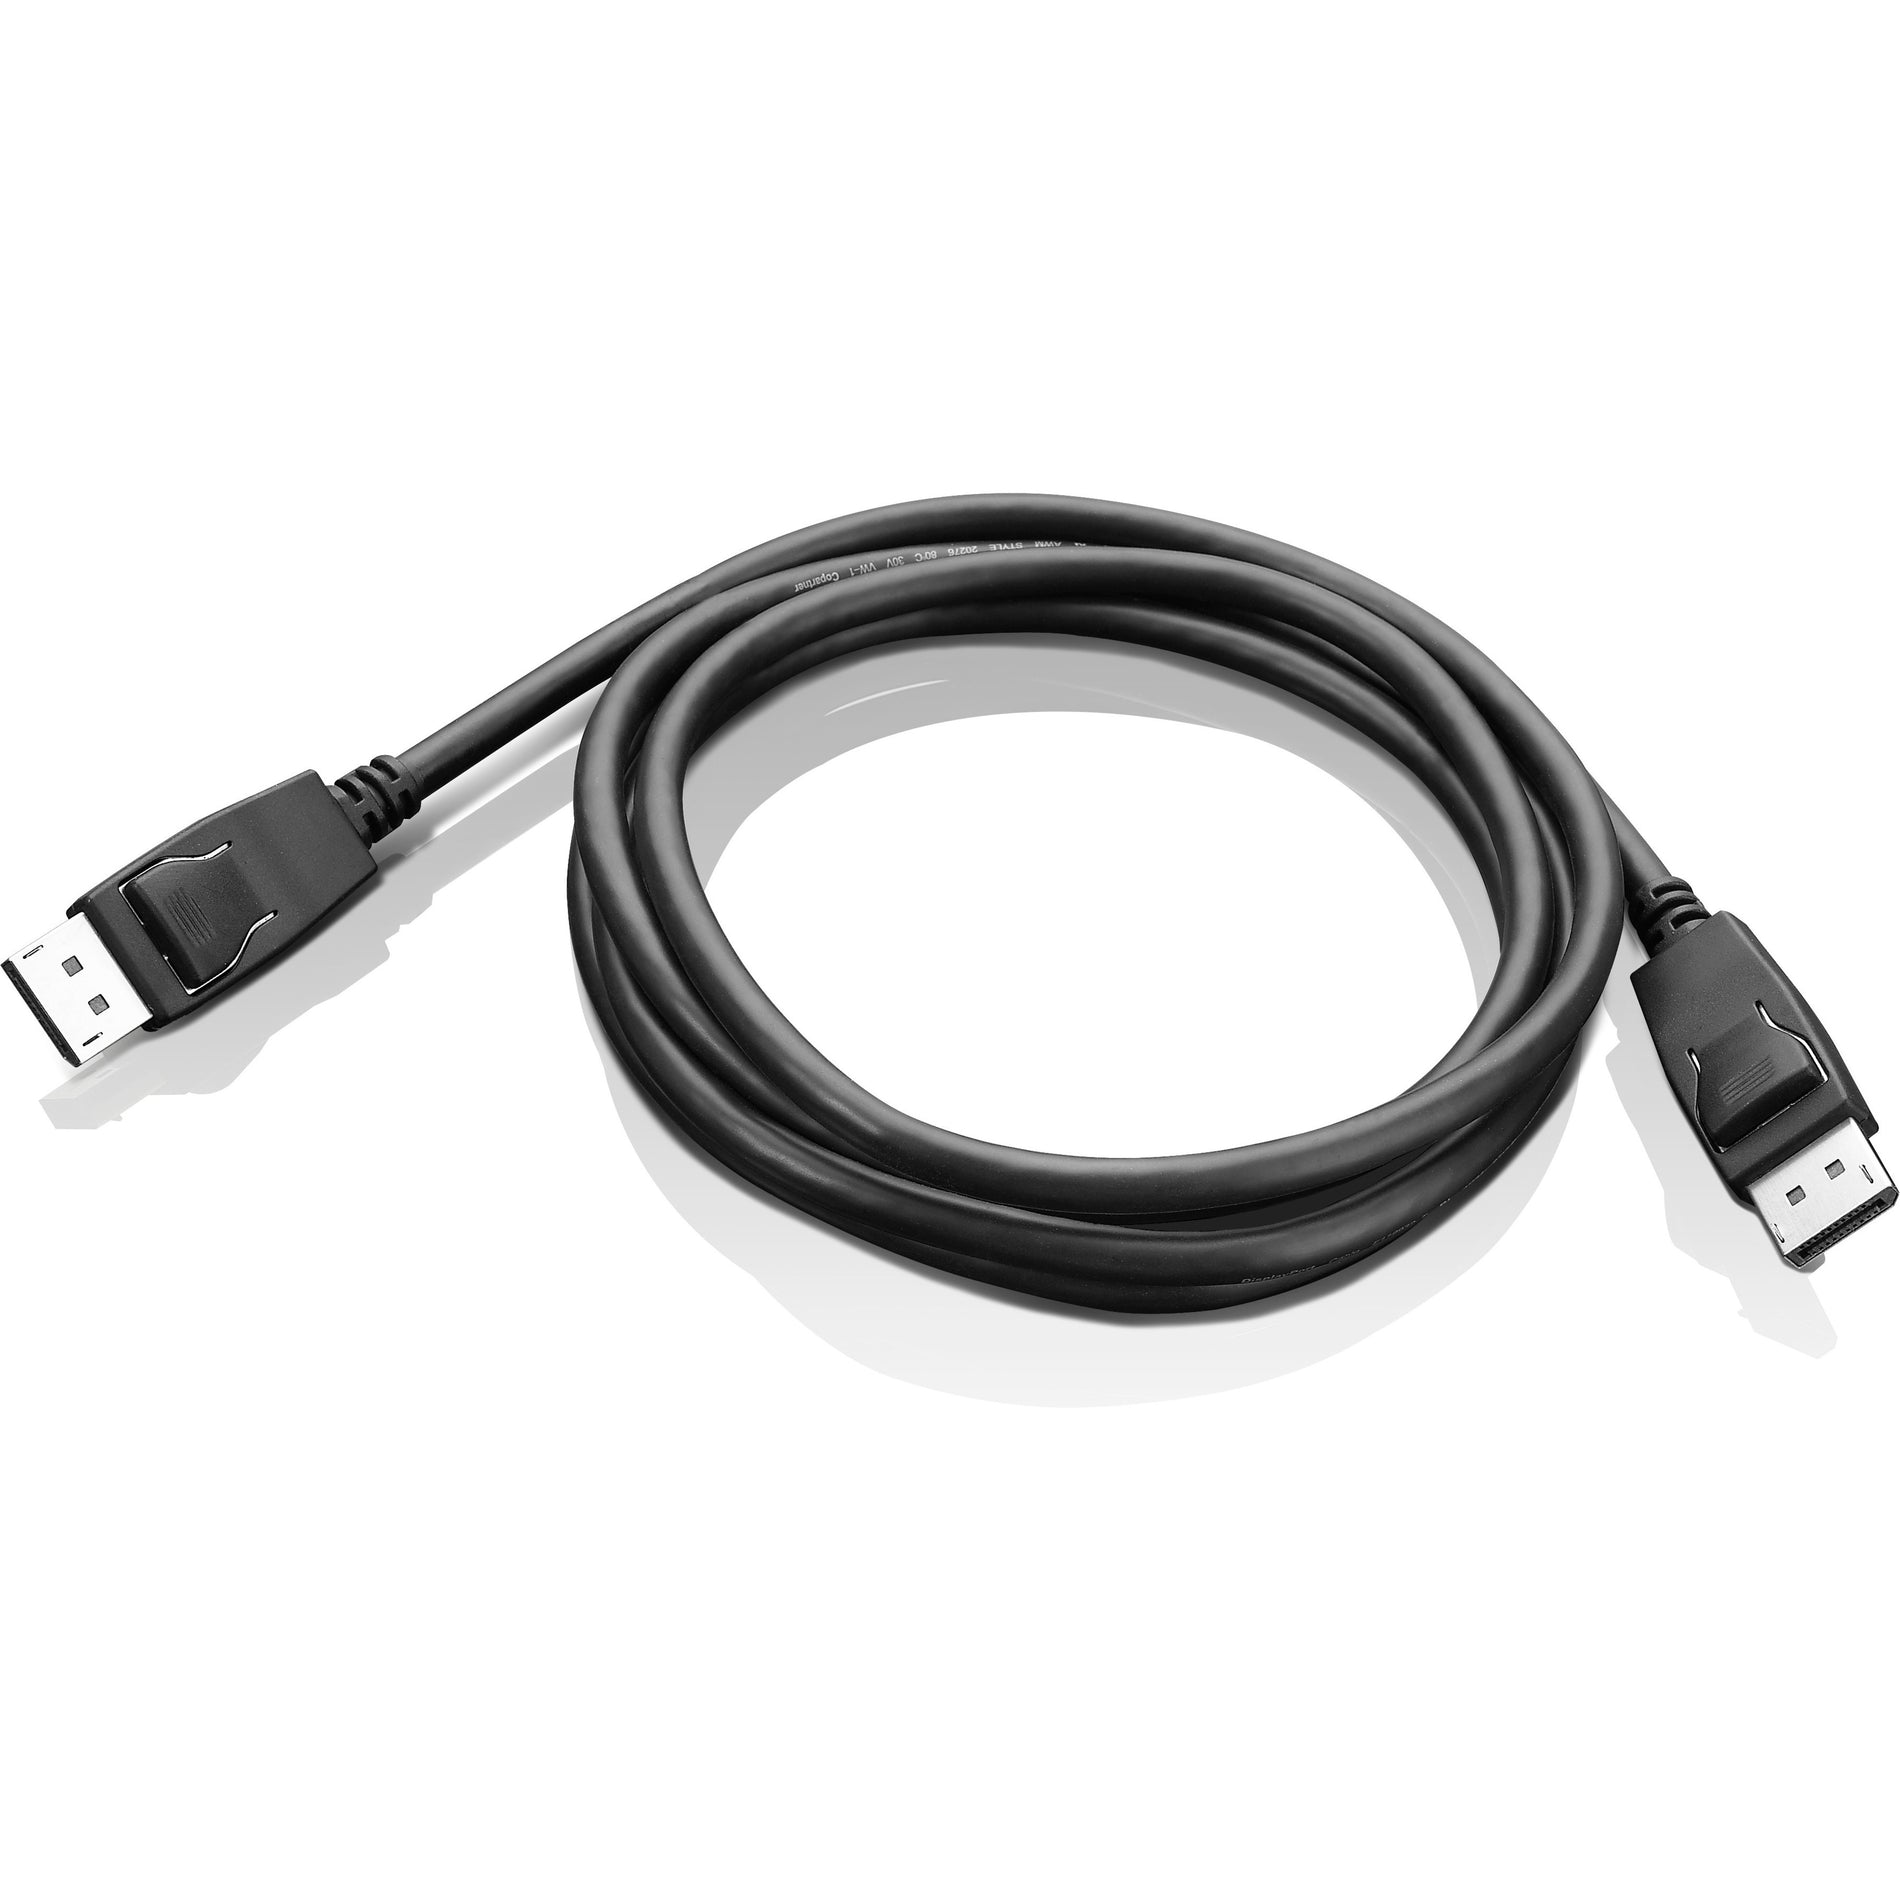 Lenovo 4X91D97239 Displayport Audio/Video Cable, High-Speed Data Transfer, 4K Resolution Support